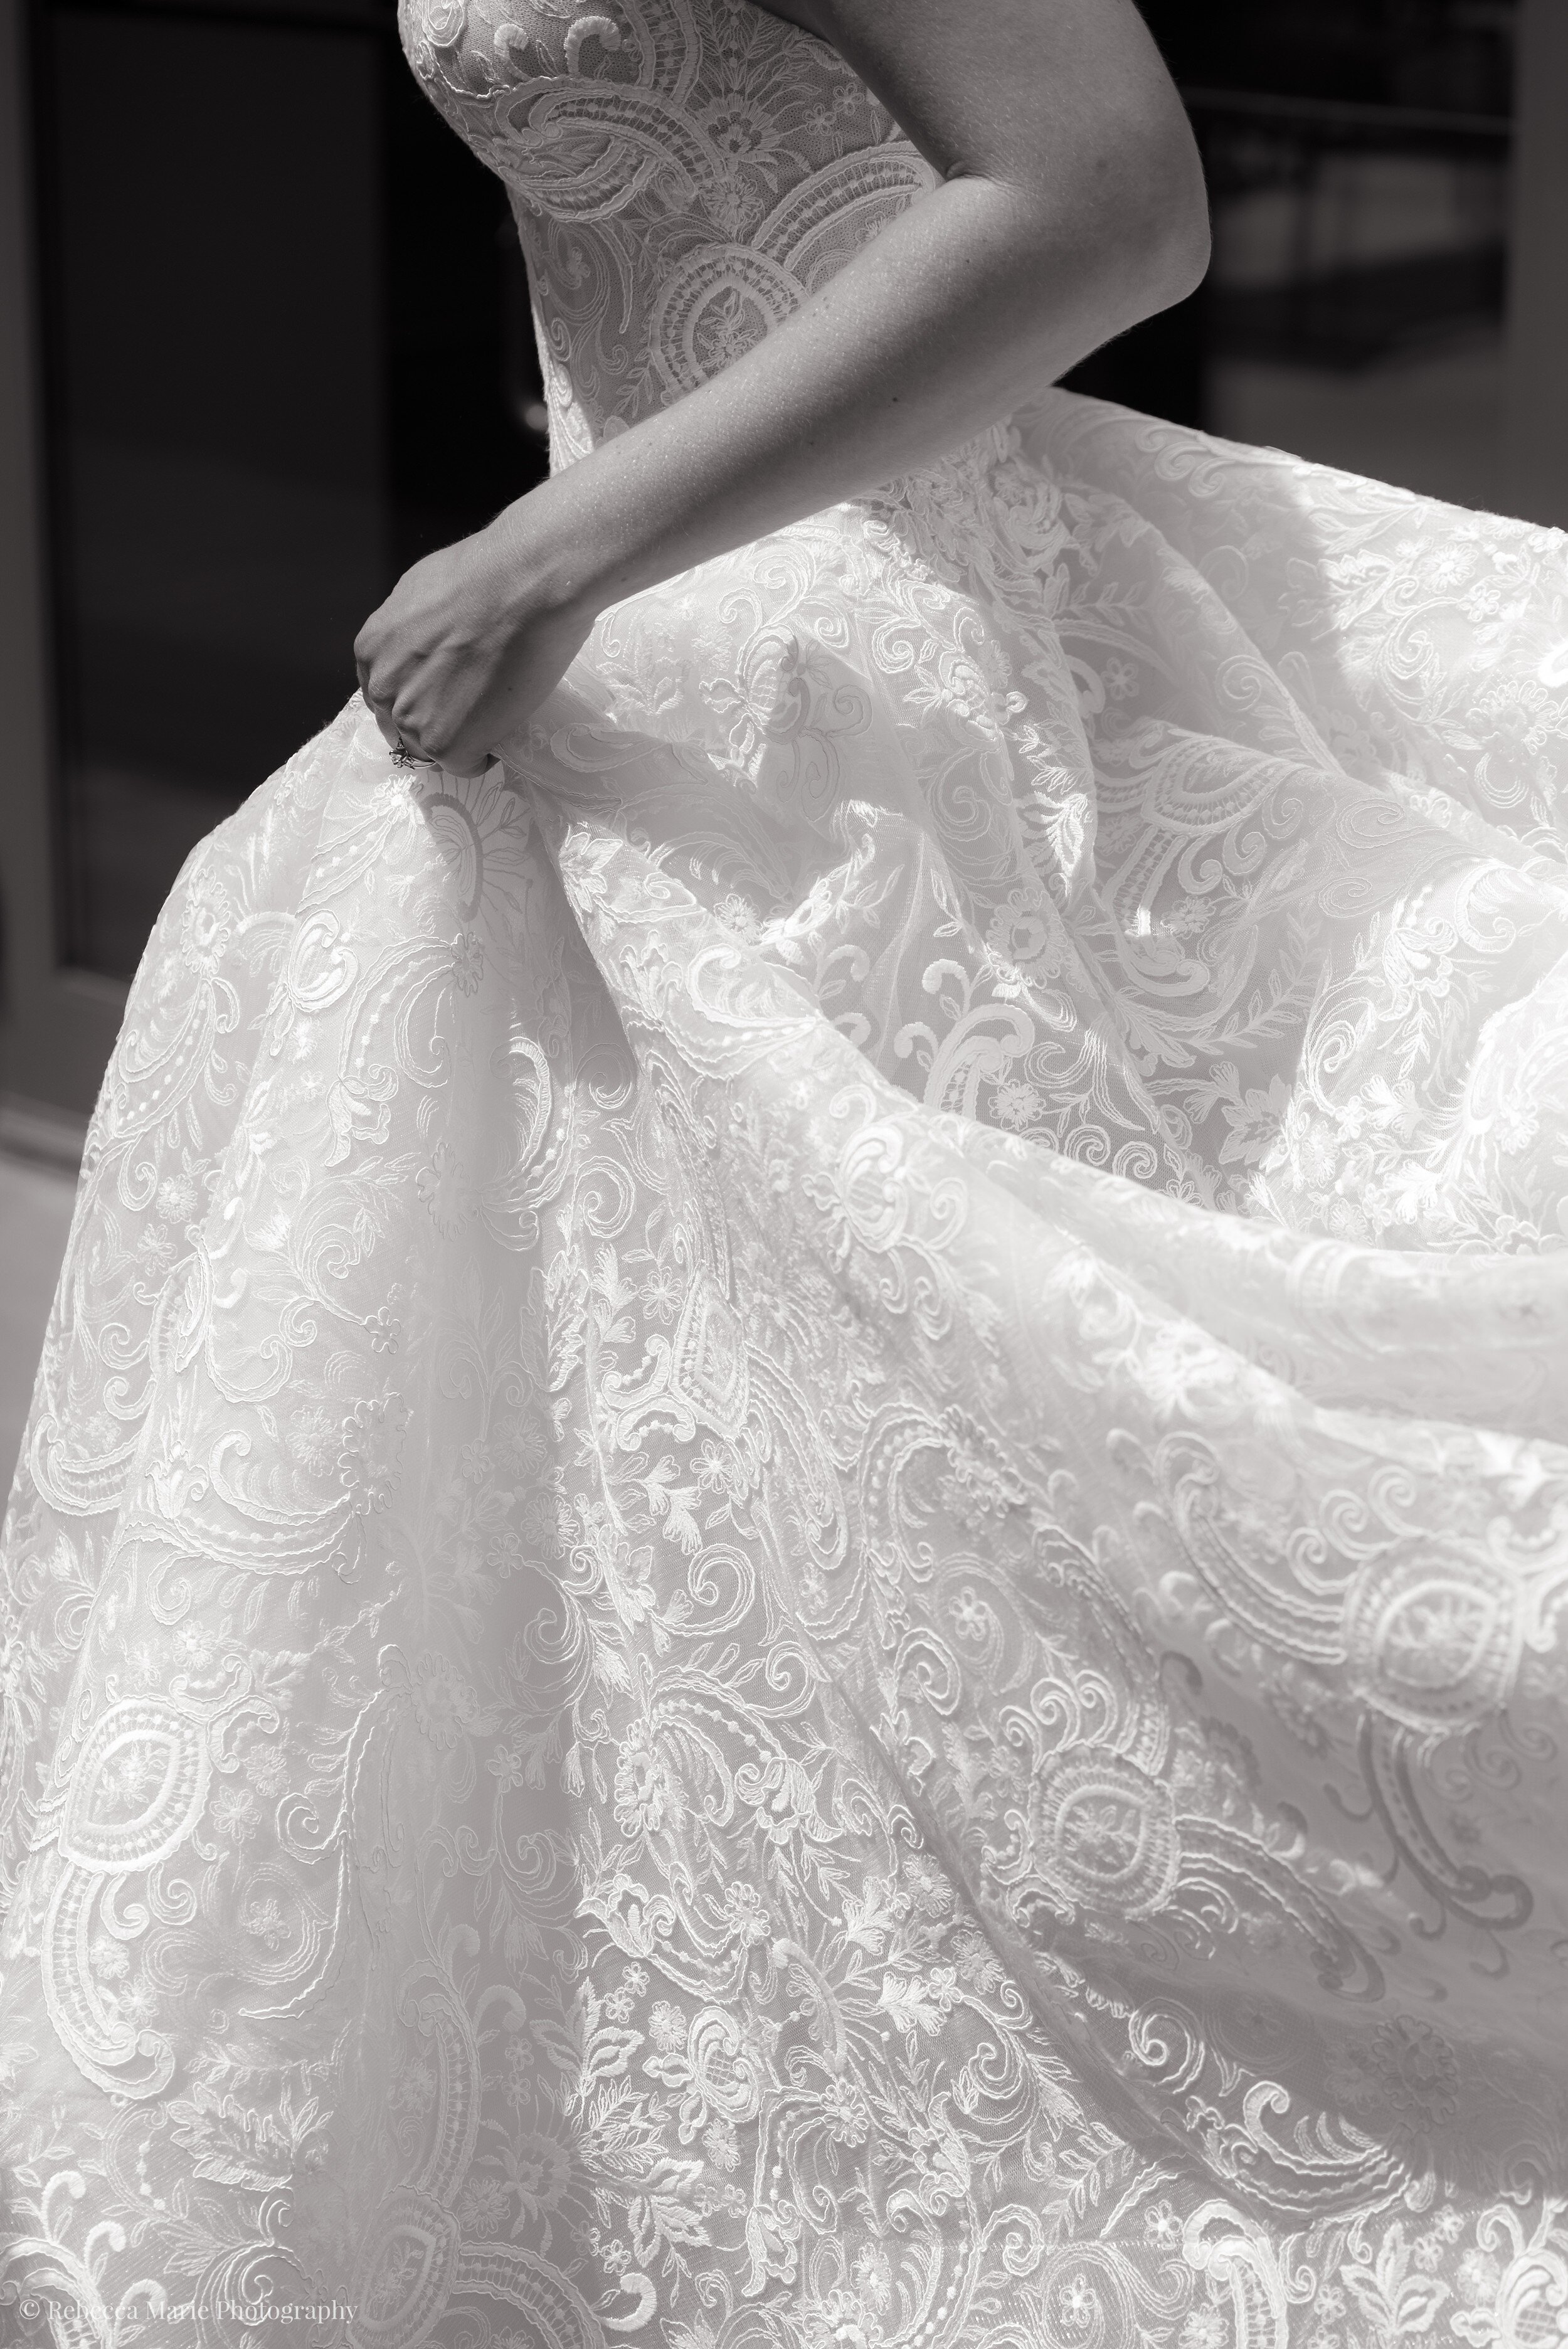 Isabelle Armstrong wedding dress from Kleinfeld's